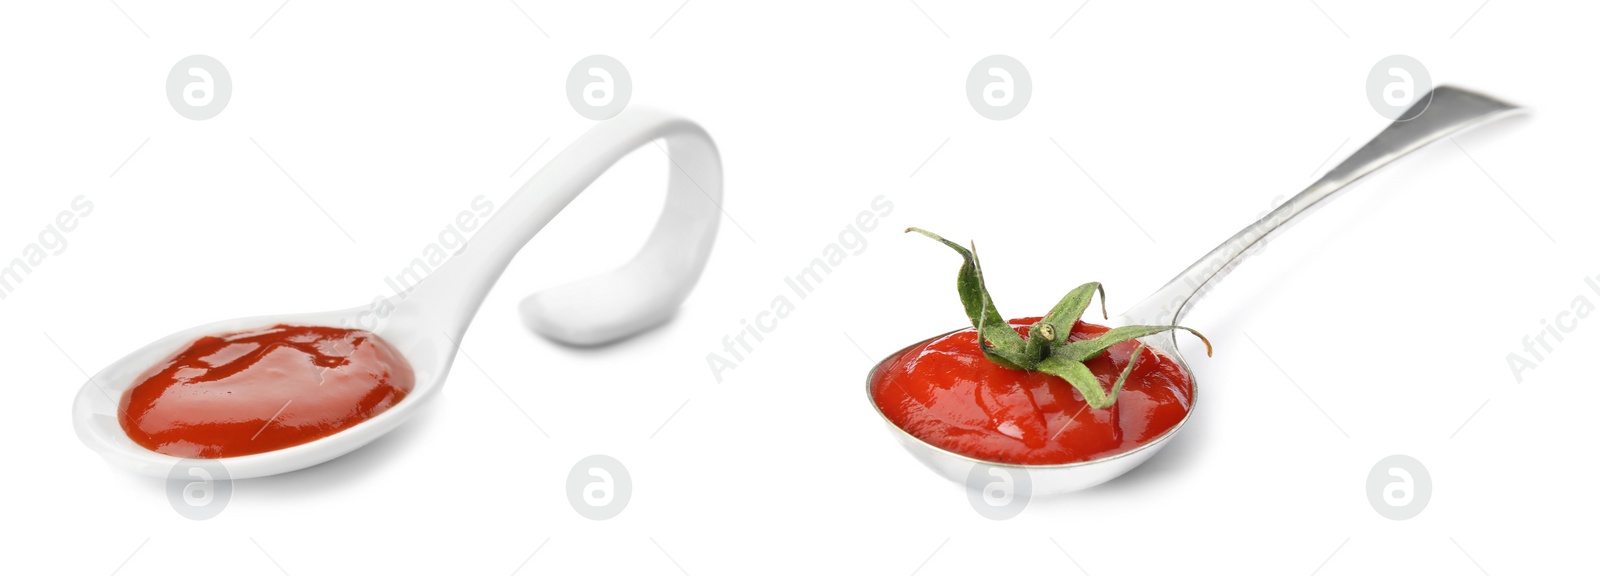 Image of Tomato sauces in spoons on white background